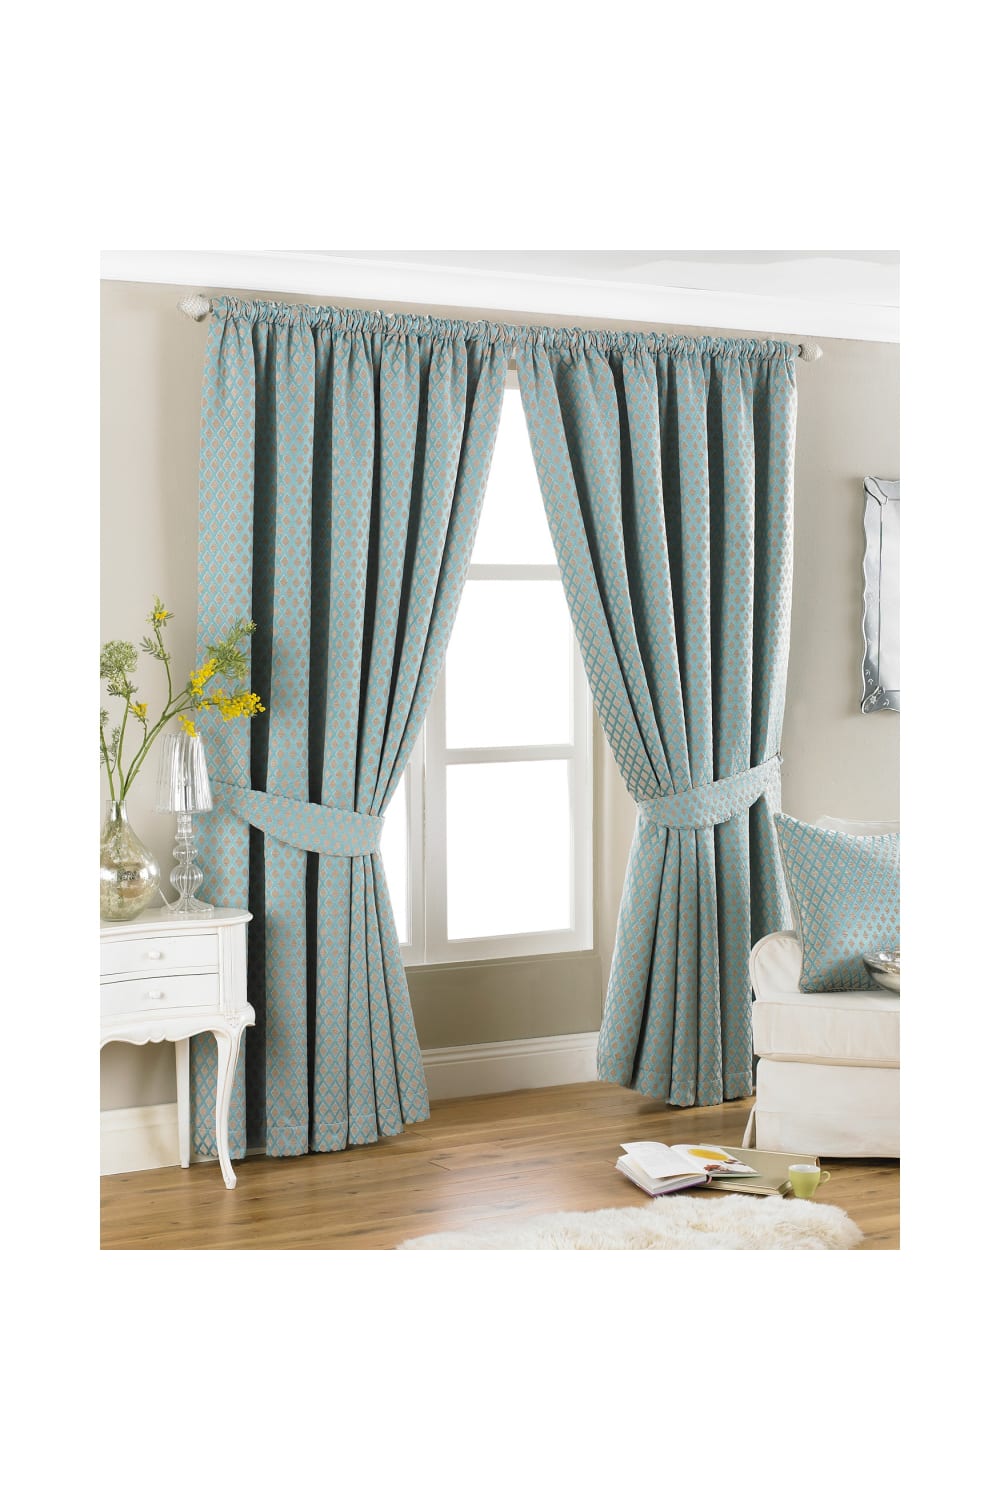 Riva Home Devere Pencil Pleat Curtains (Turquoise) (90 x 90 inch)